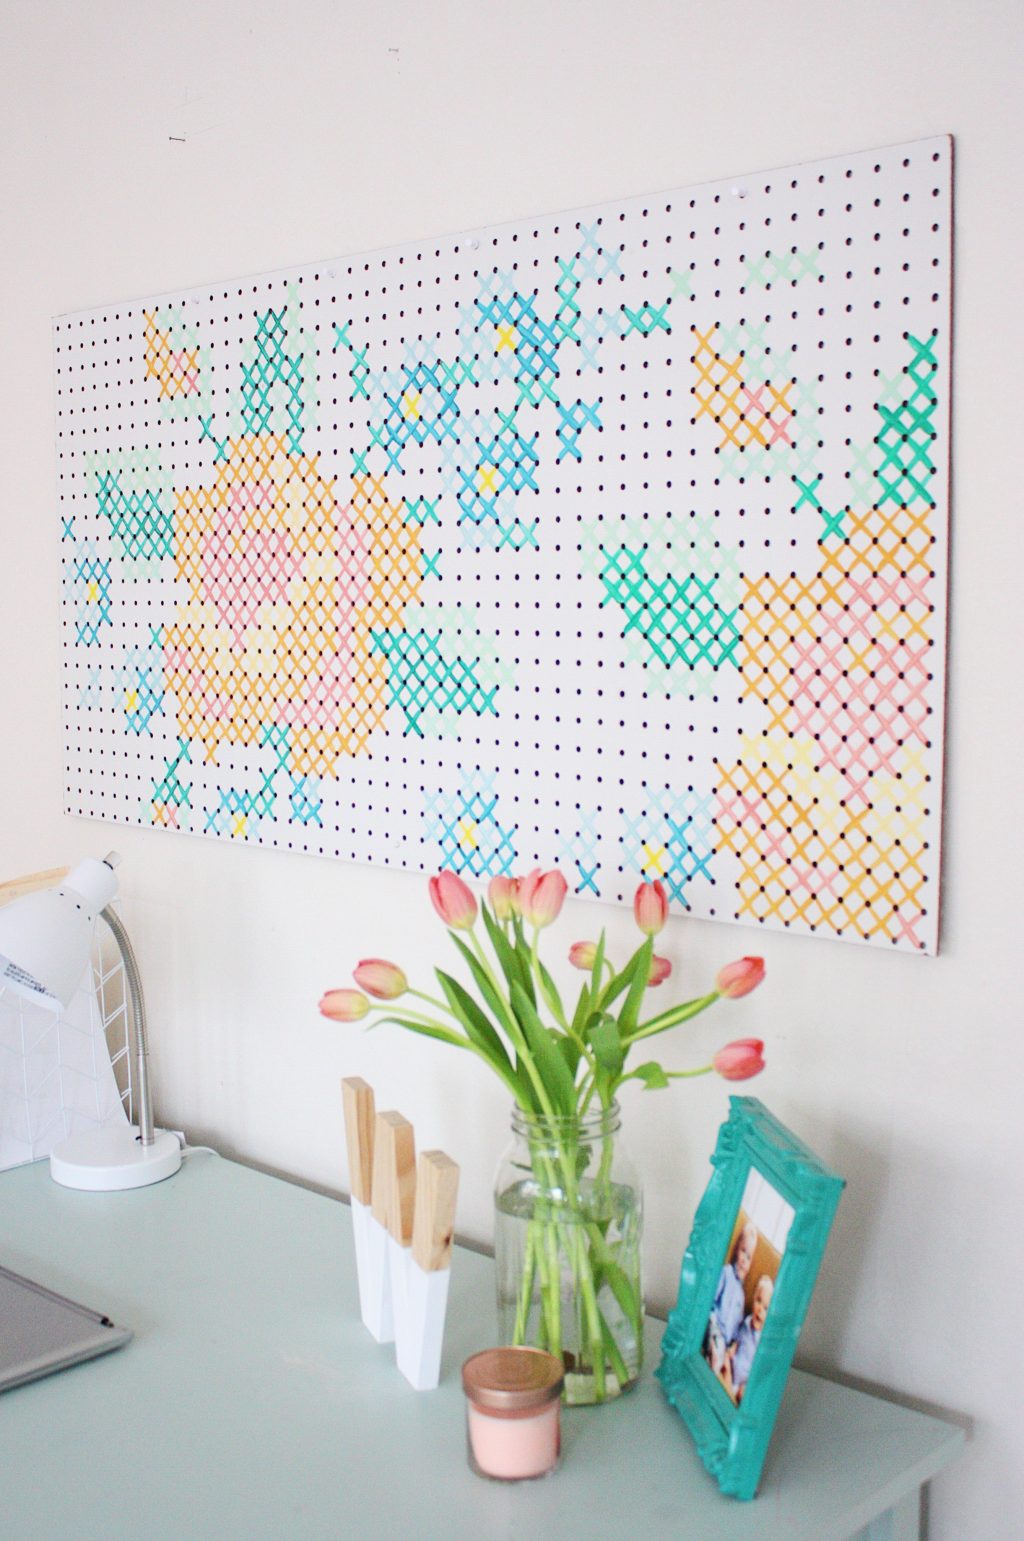 9. Decorative Pegboard Ideas for the Less Artistic